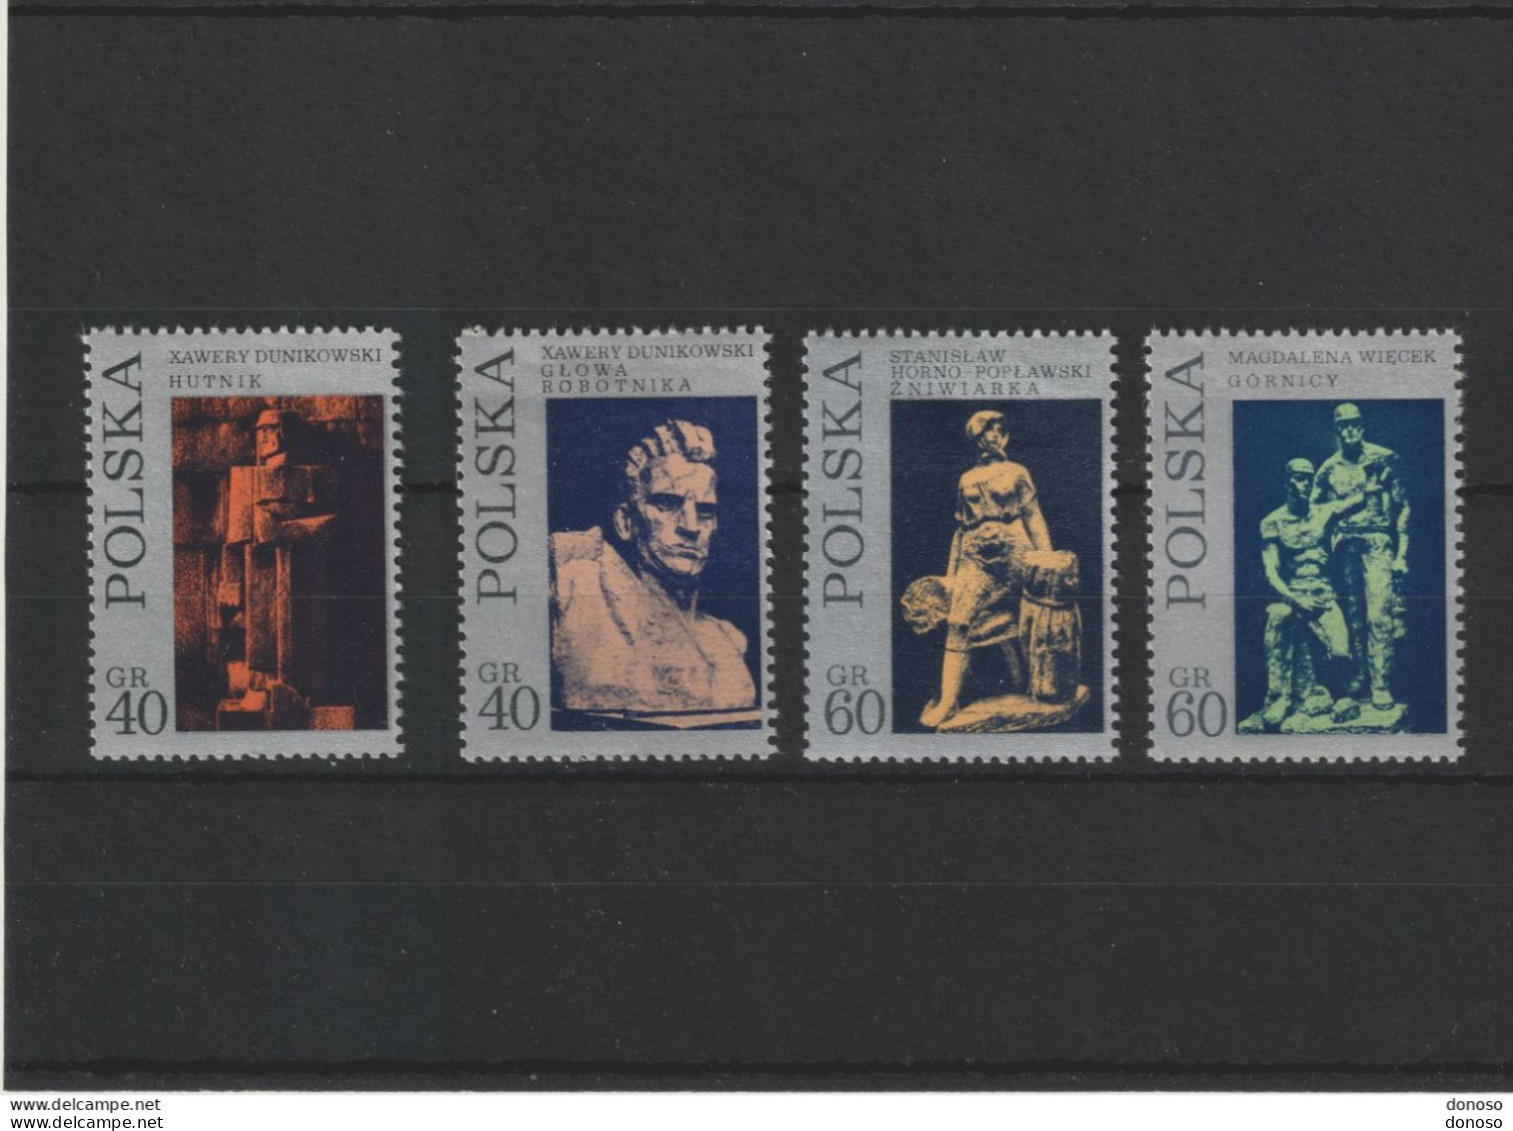 POLOGNE 1971 SCULPTURES Yvert 1944-1947,  Michel 2097-2100 NEUF** MNH - Unused Stamps